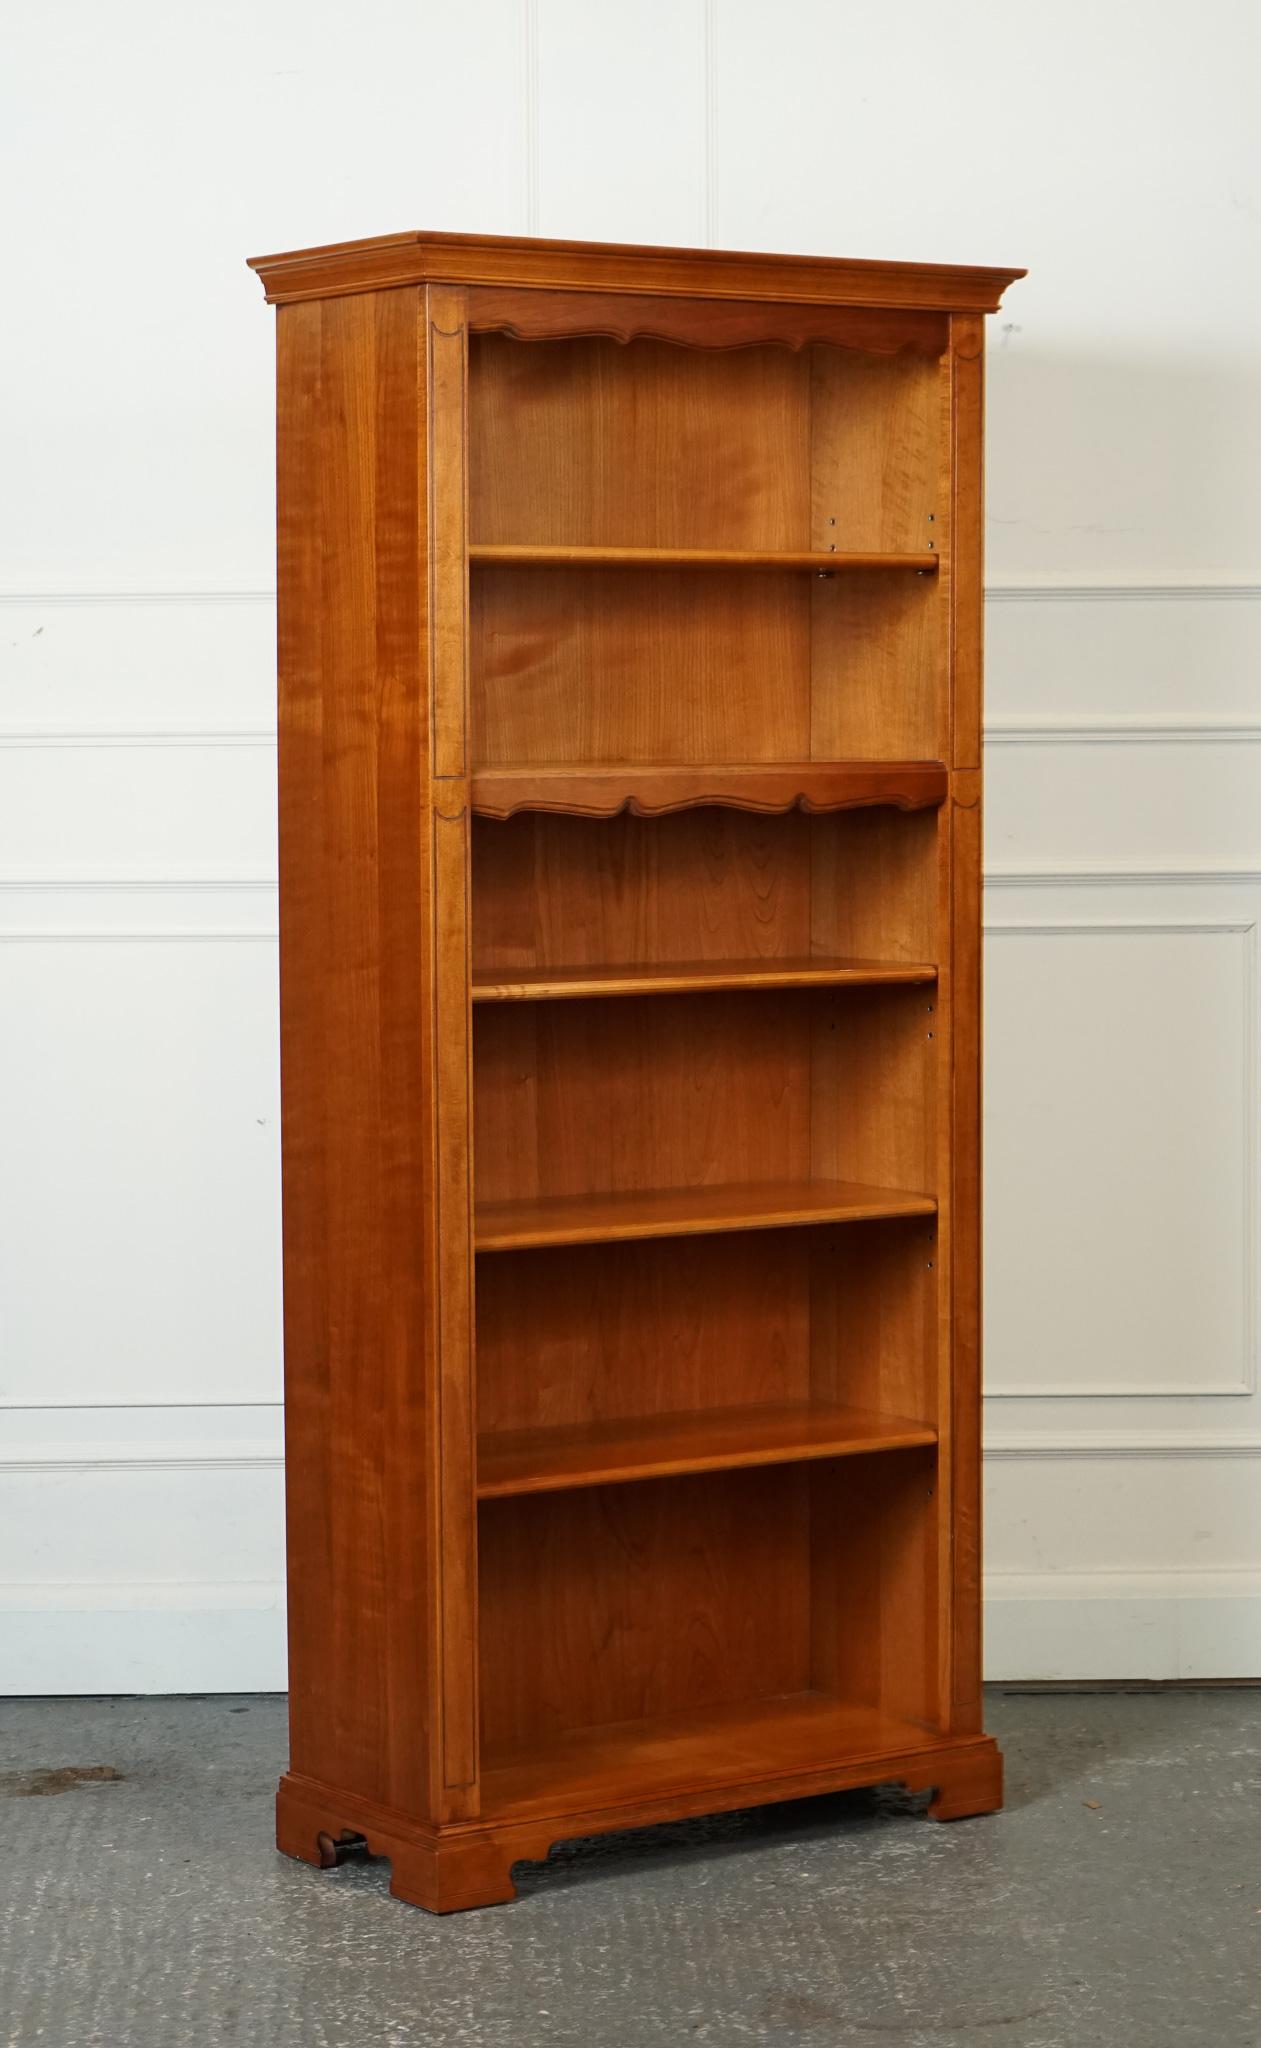 

We are delighted to offer for sale this Lovely vintage Tall Open Solid Bookcase With 5 Shelves Made By Younger Furniture London

 A classic yet stylish design that showcases quality craftsmanship providing a durable and elegant storage solution